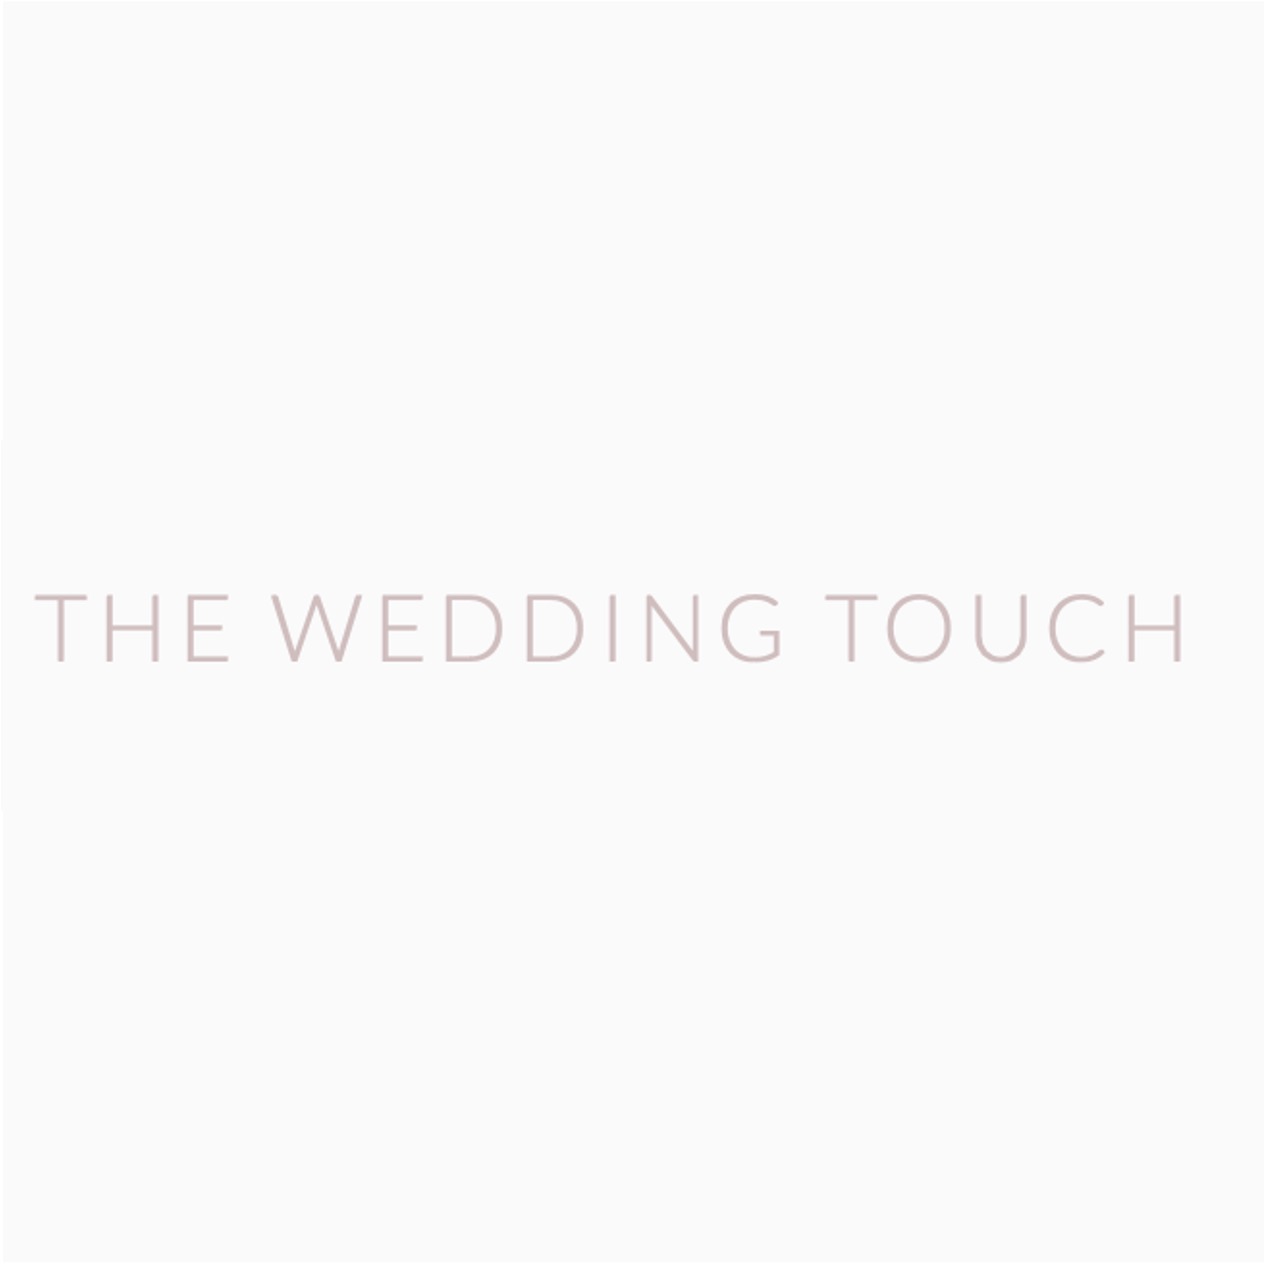 The Wedding Touch